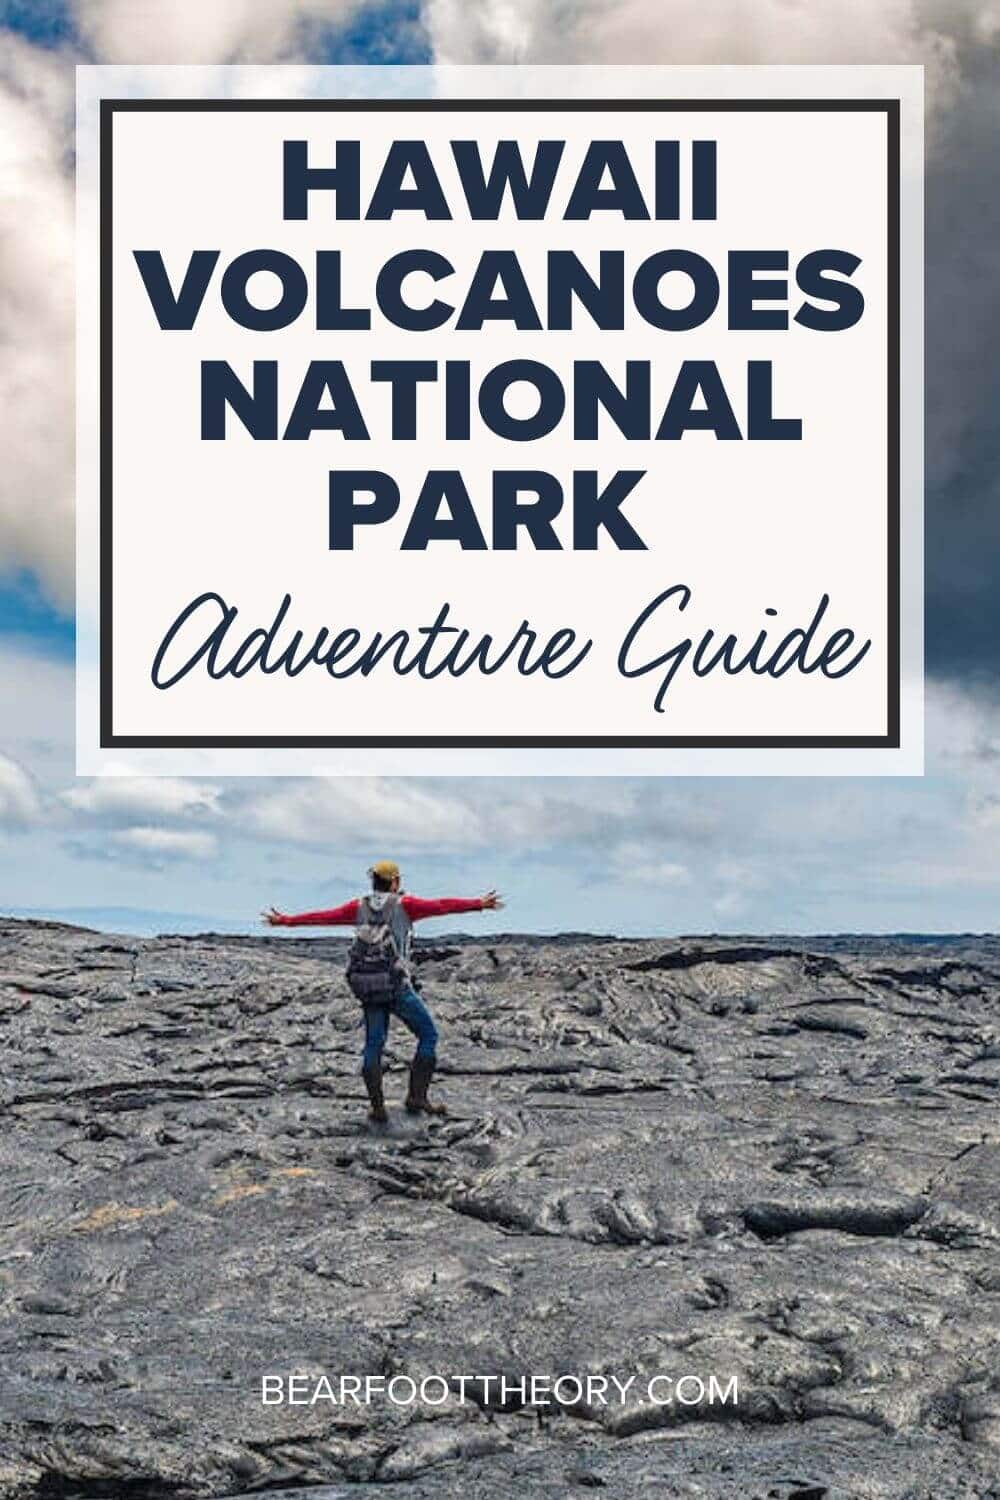 Make the most of your visit to Hawaii Volcanoes National Park with this adventure guide including best things to do, where to camp, & more.